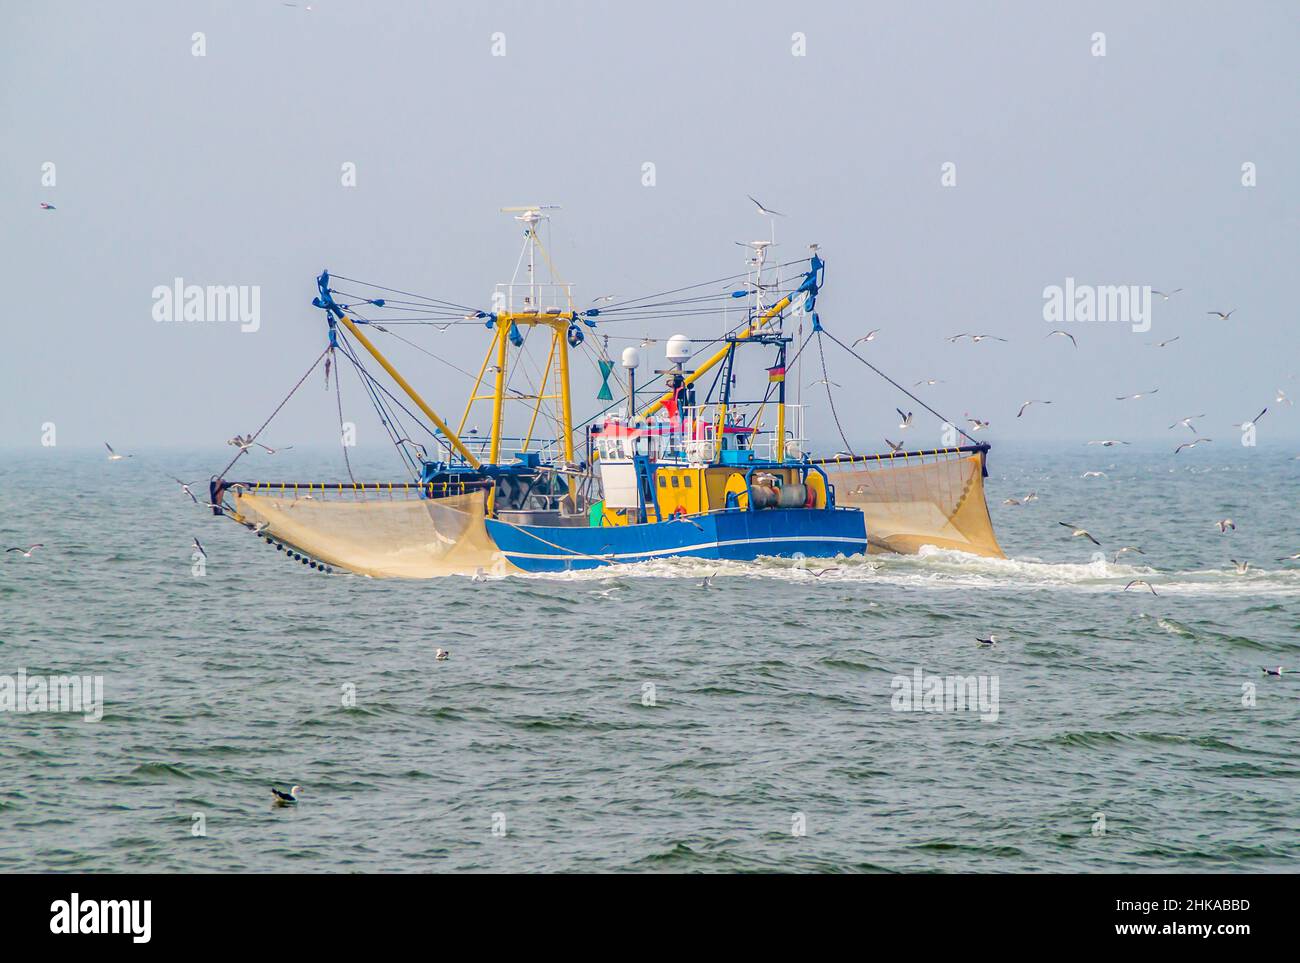 Shrimp cutter on the North Sea Stock Photo